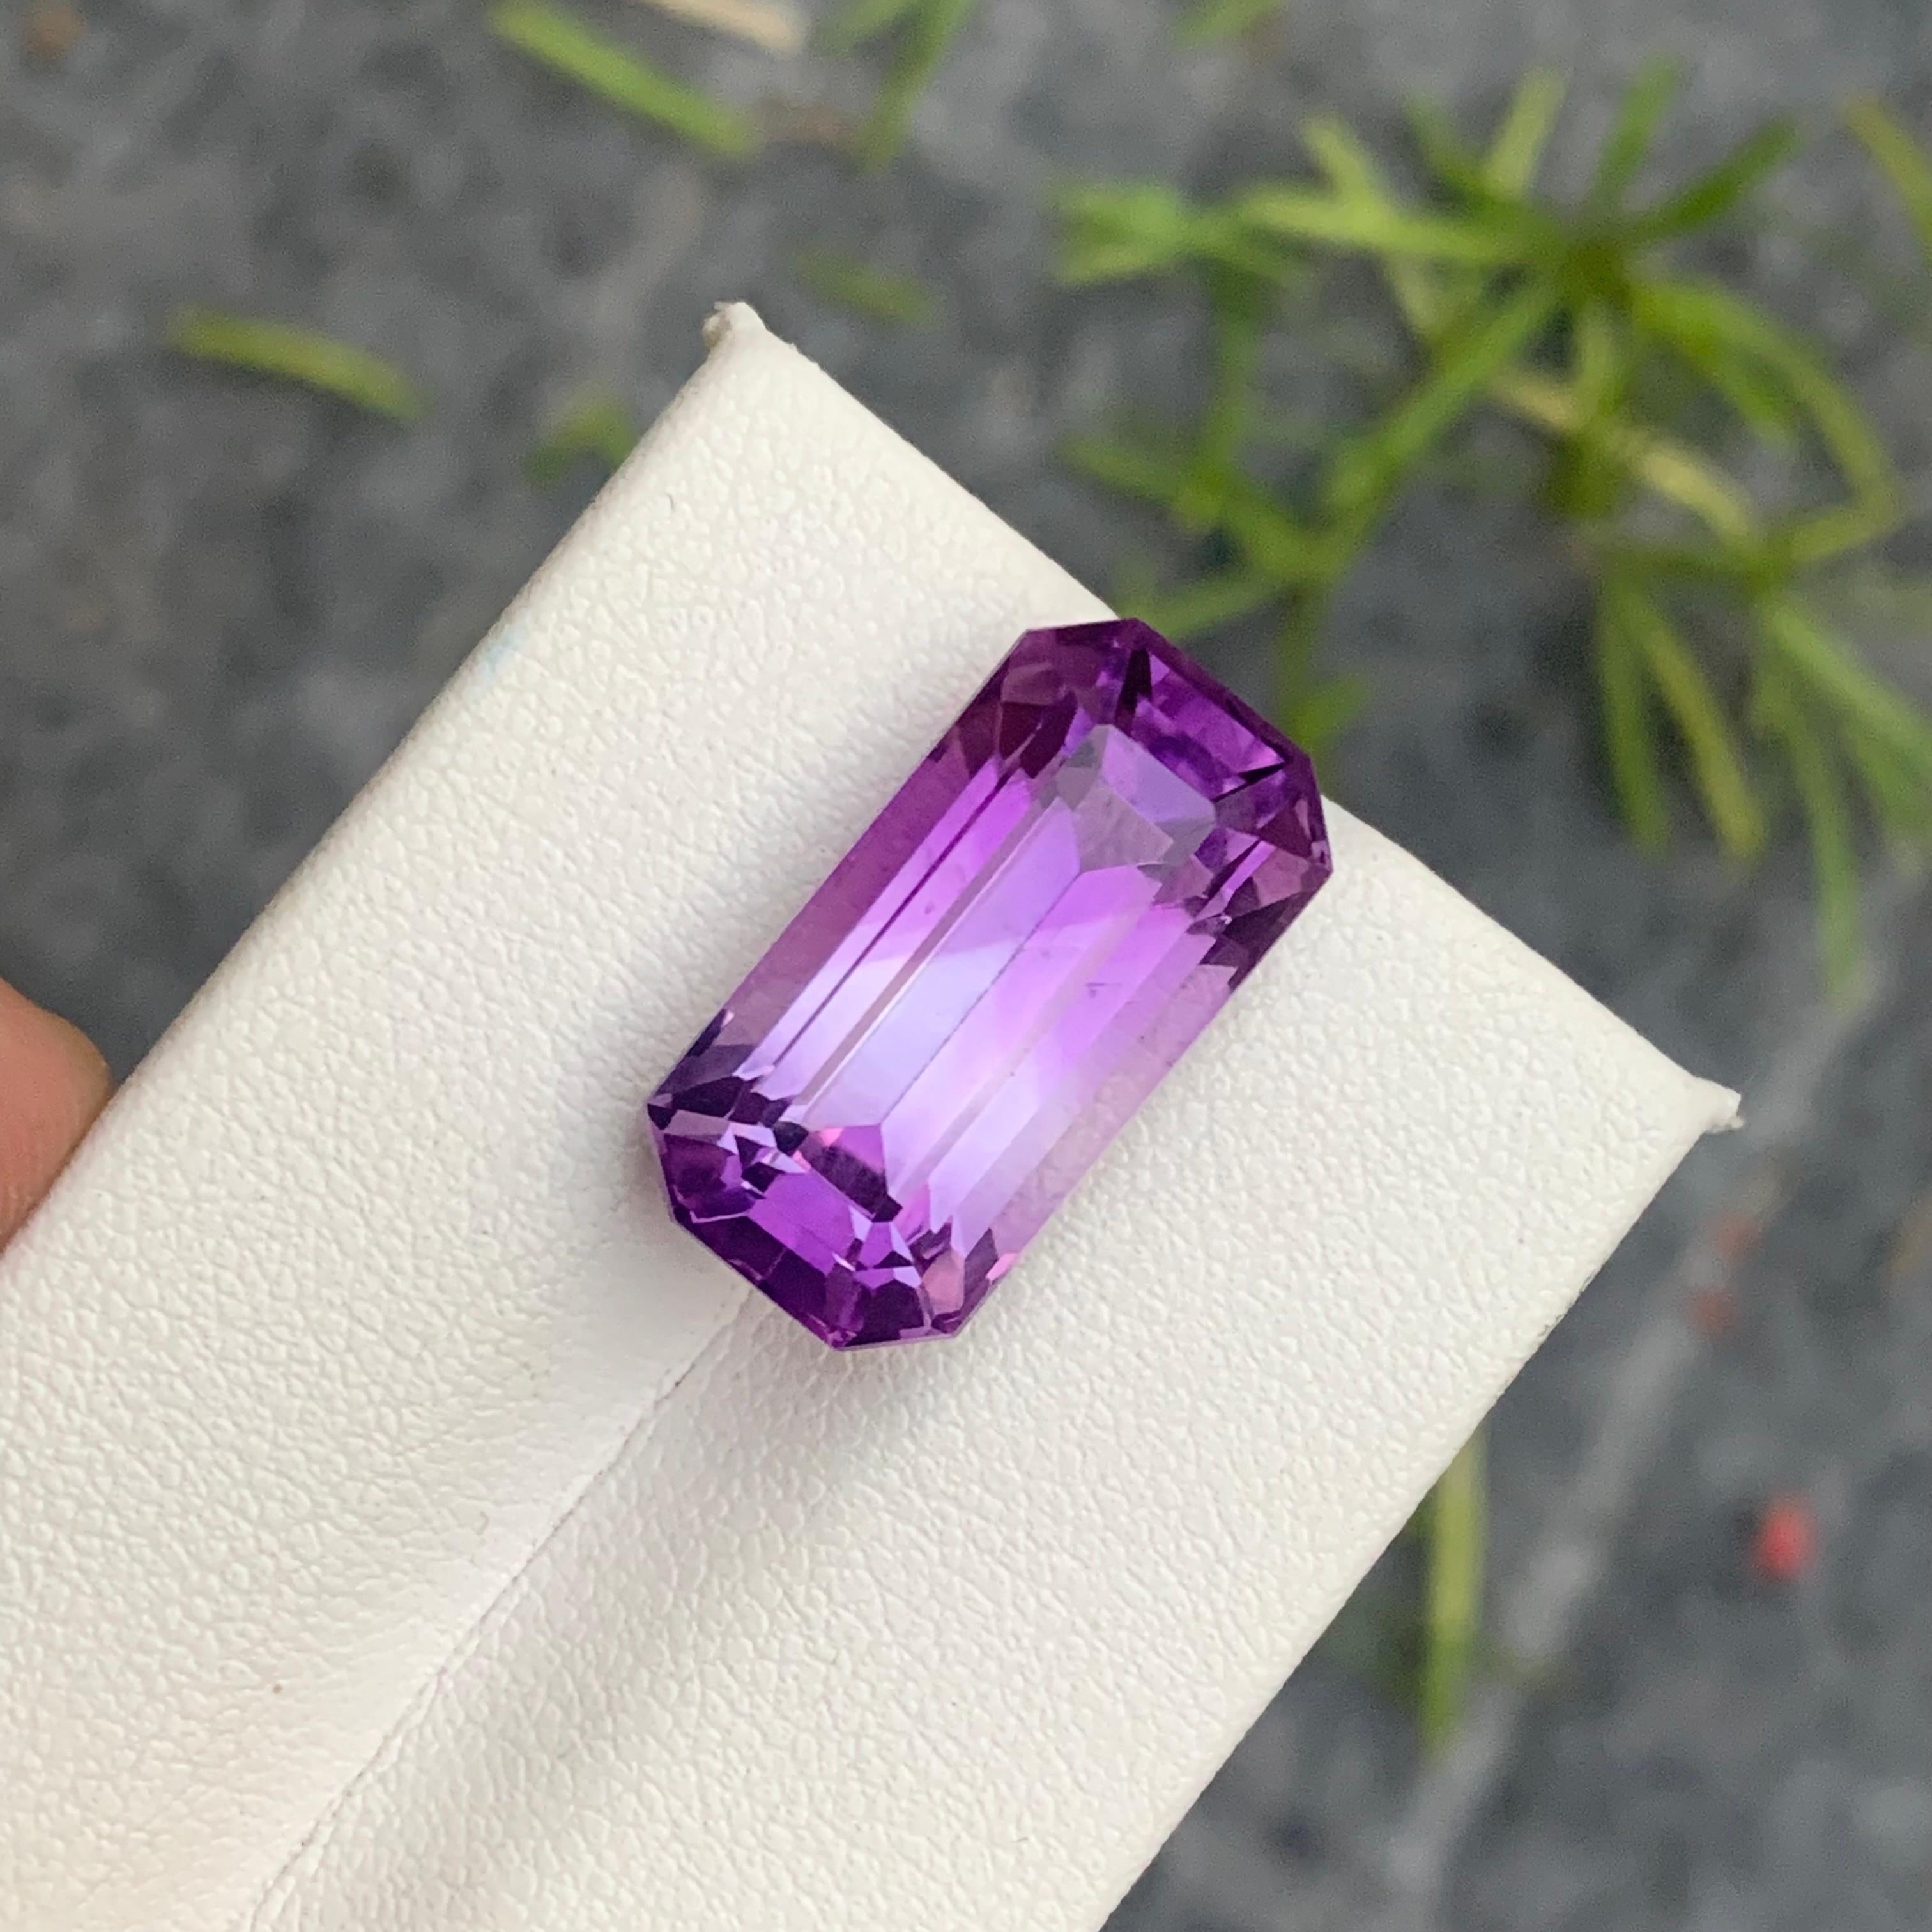 Gemstone Type : Amethyst
Weight : 14.0 Carats
Dimensions : 19.3x9.9x10.1 mm
Clarity : Eye Clean(SI)
Origin : Brazil
Color: Purple
Shape: Emerald
Certificate: On Demand
Month: February
.

Purported amethyst powers for healing
enhancing the immune